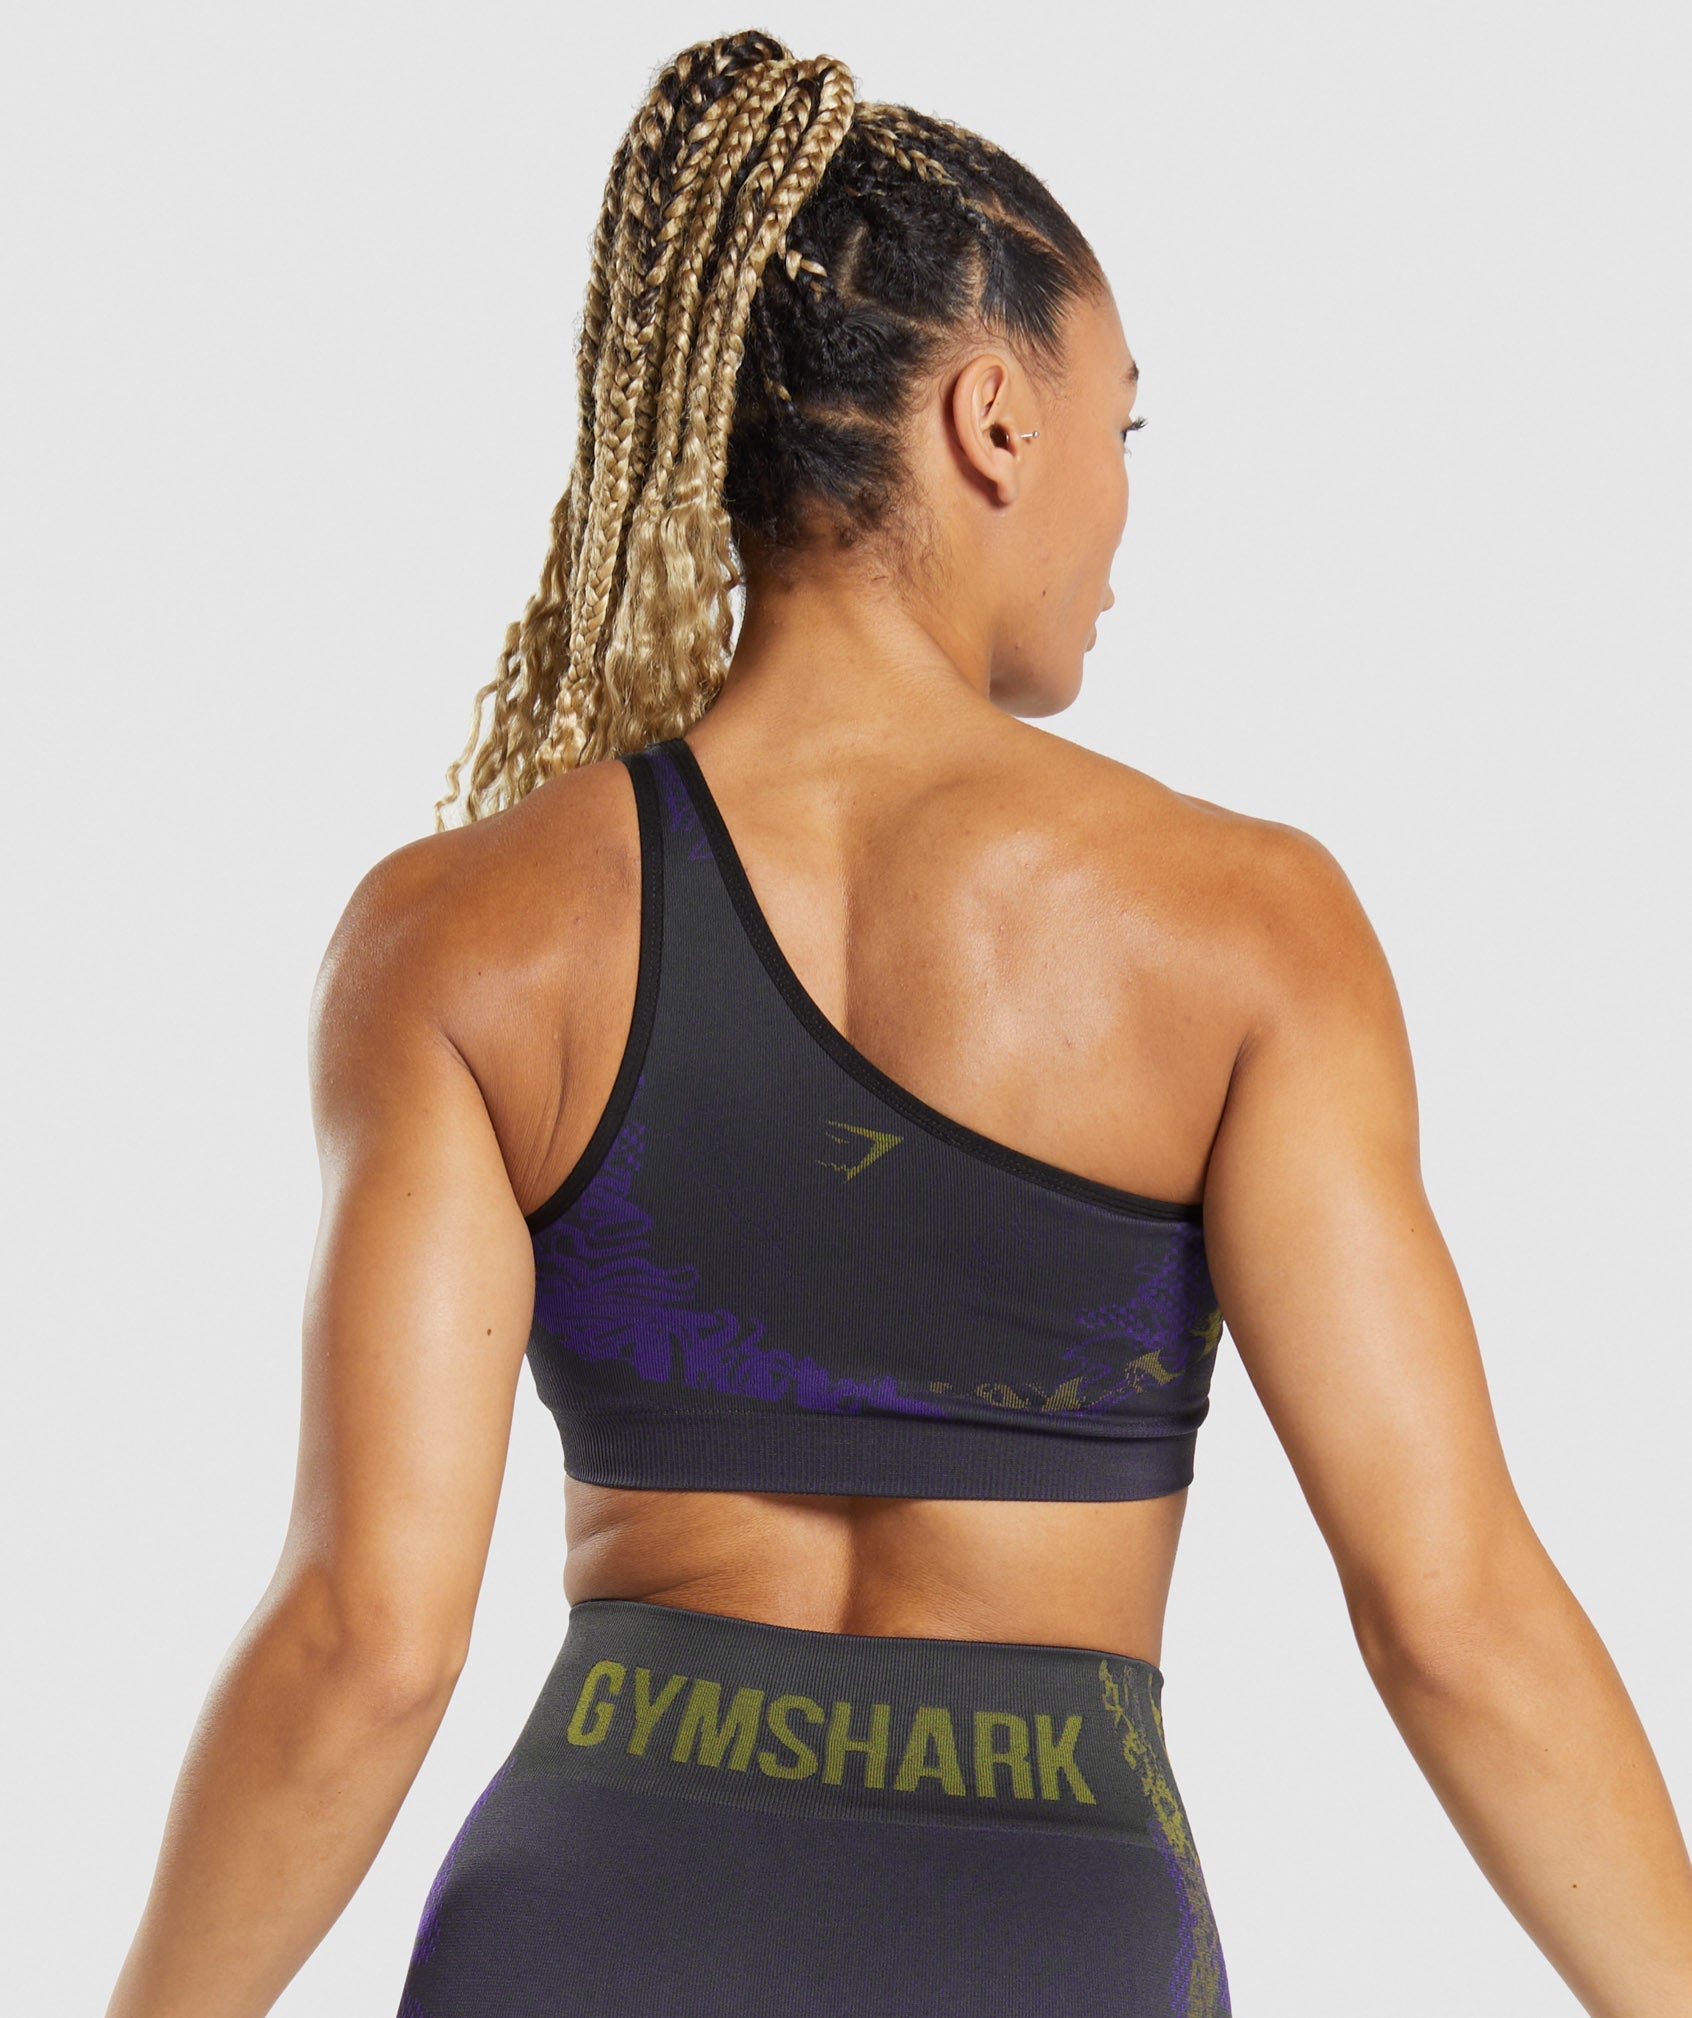 Ever wondered how @Gymshark sports bras fit on a small band large cup